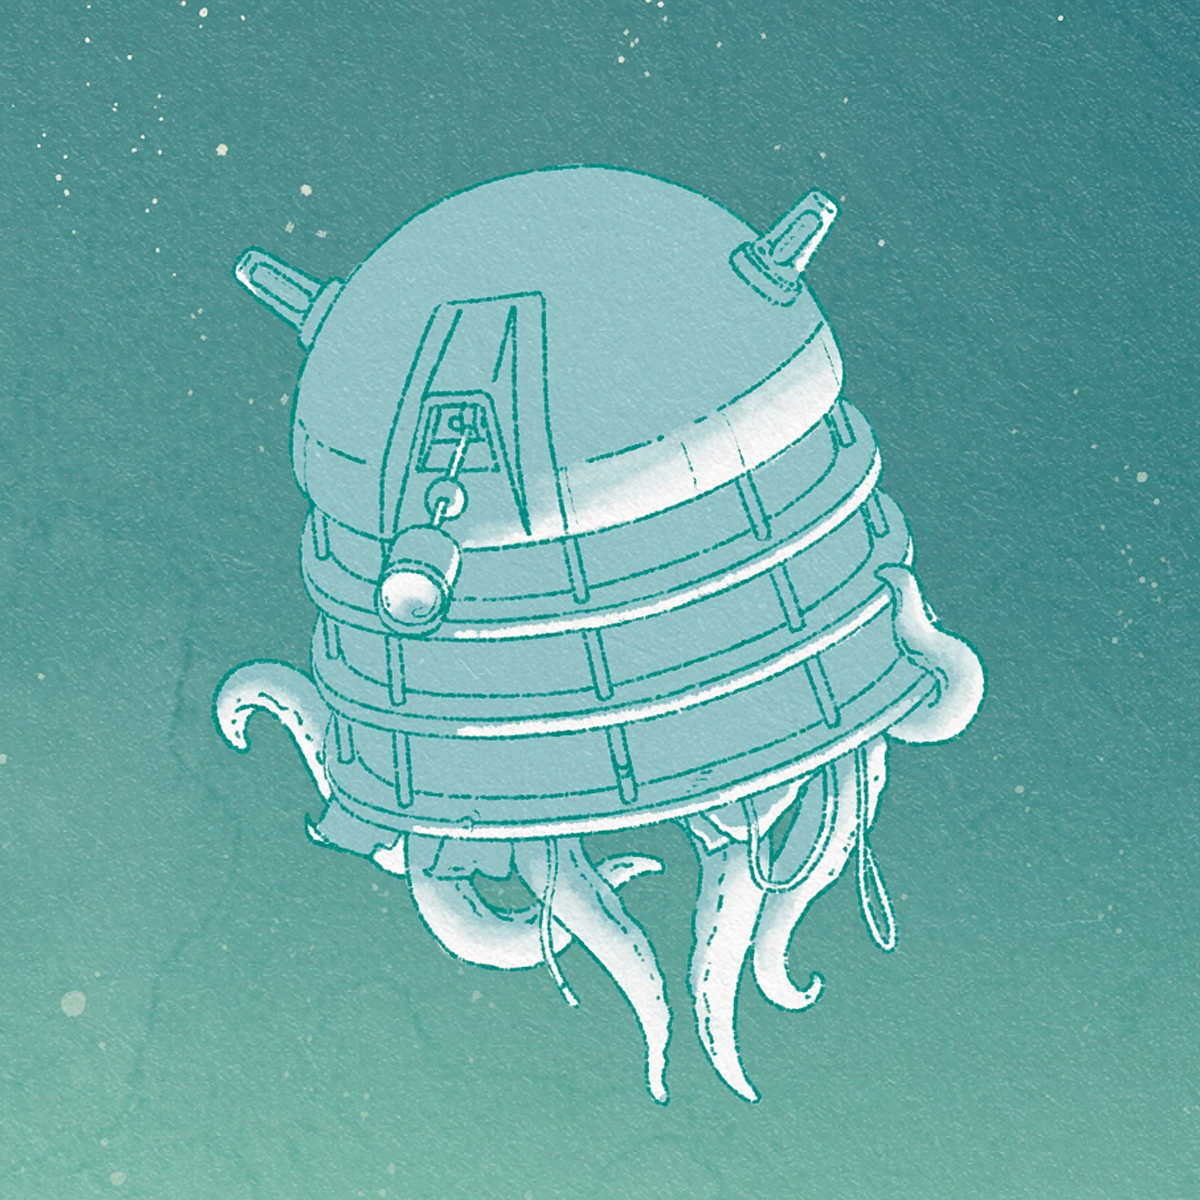 An illustration of a Doctor Who Dalek head, with a clue to what lies within.